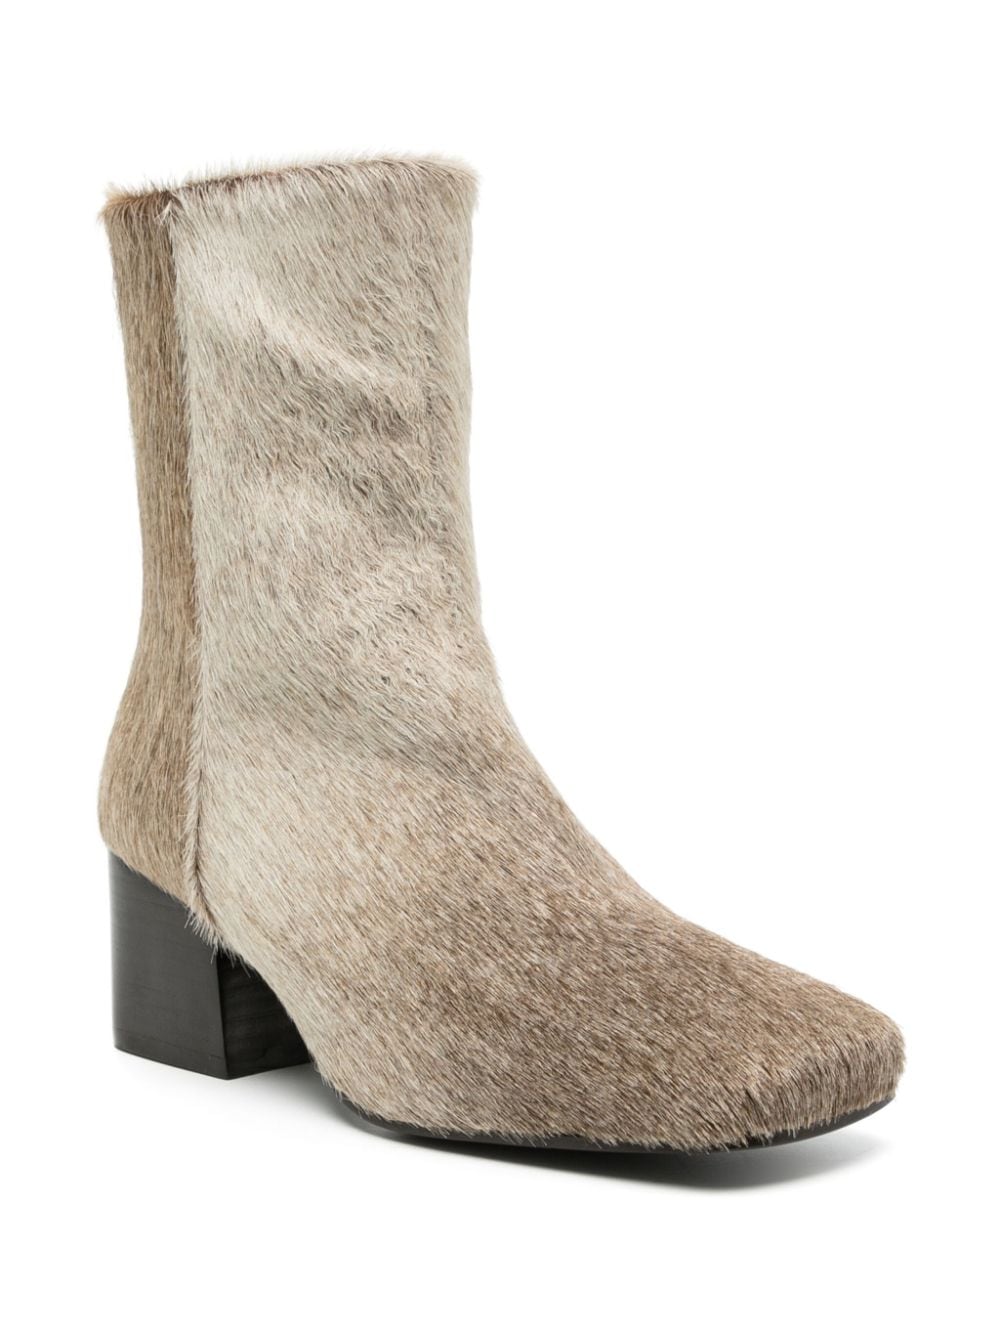 LEMAIRE leather ankle boots - Beige